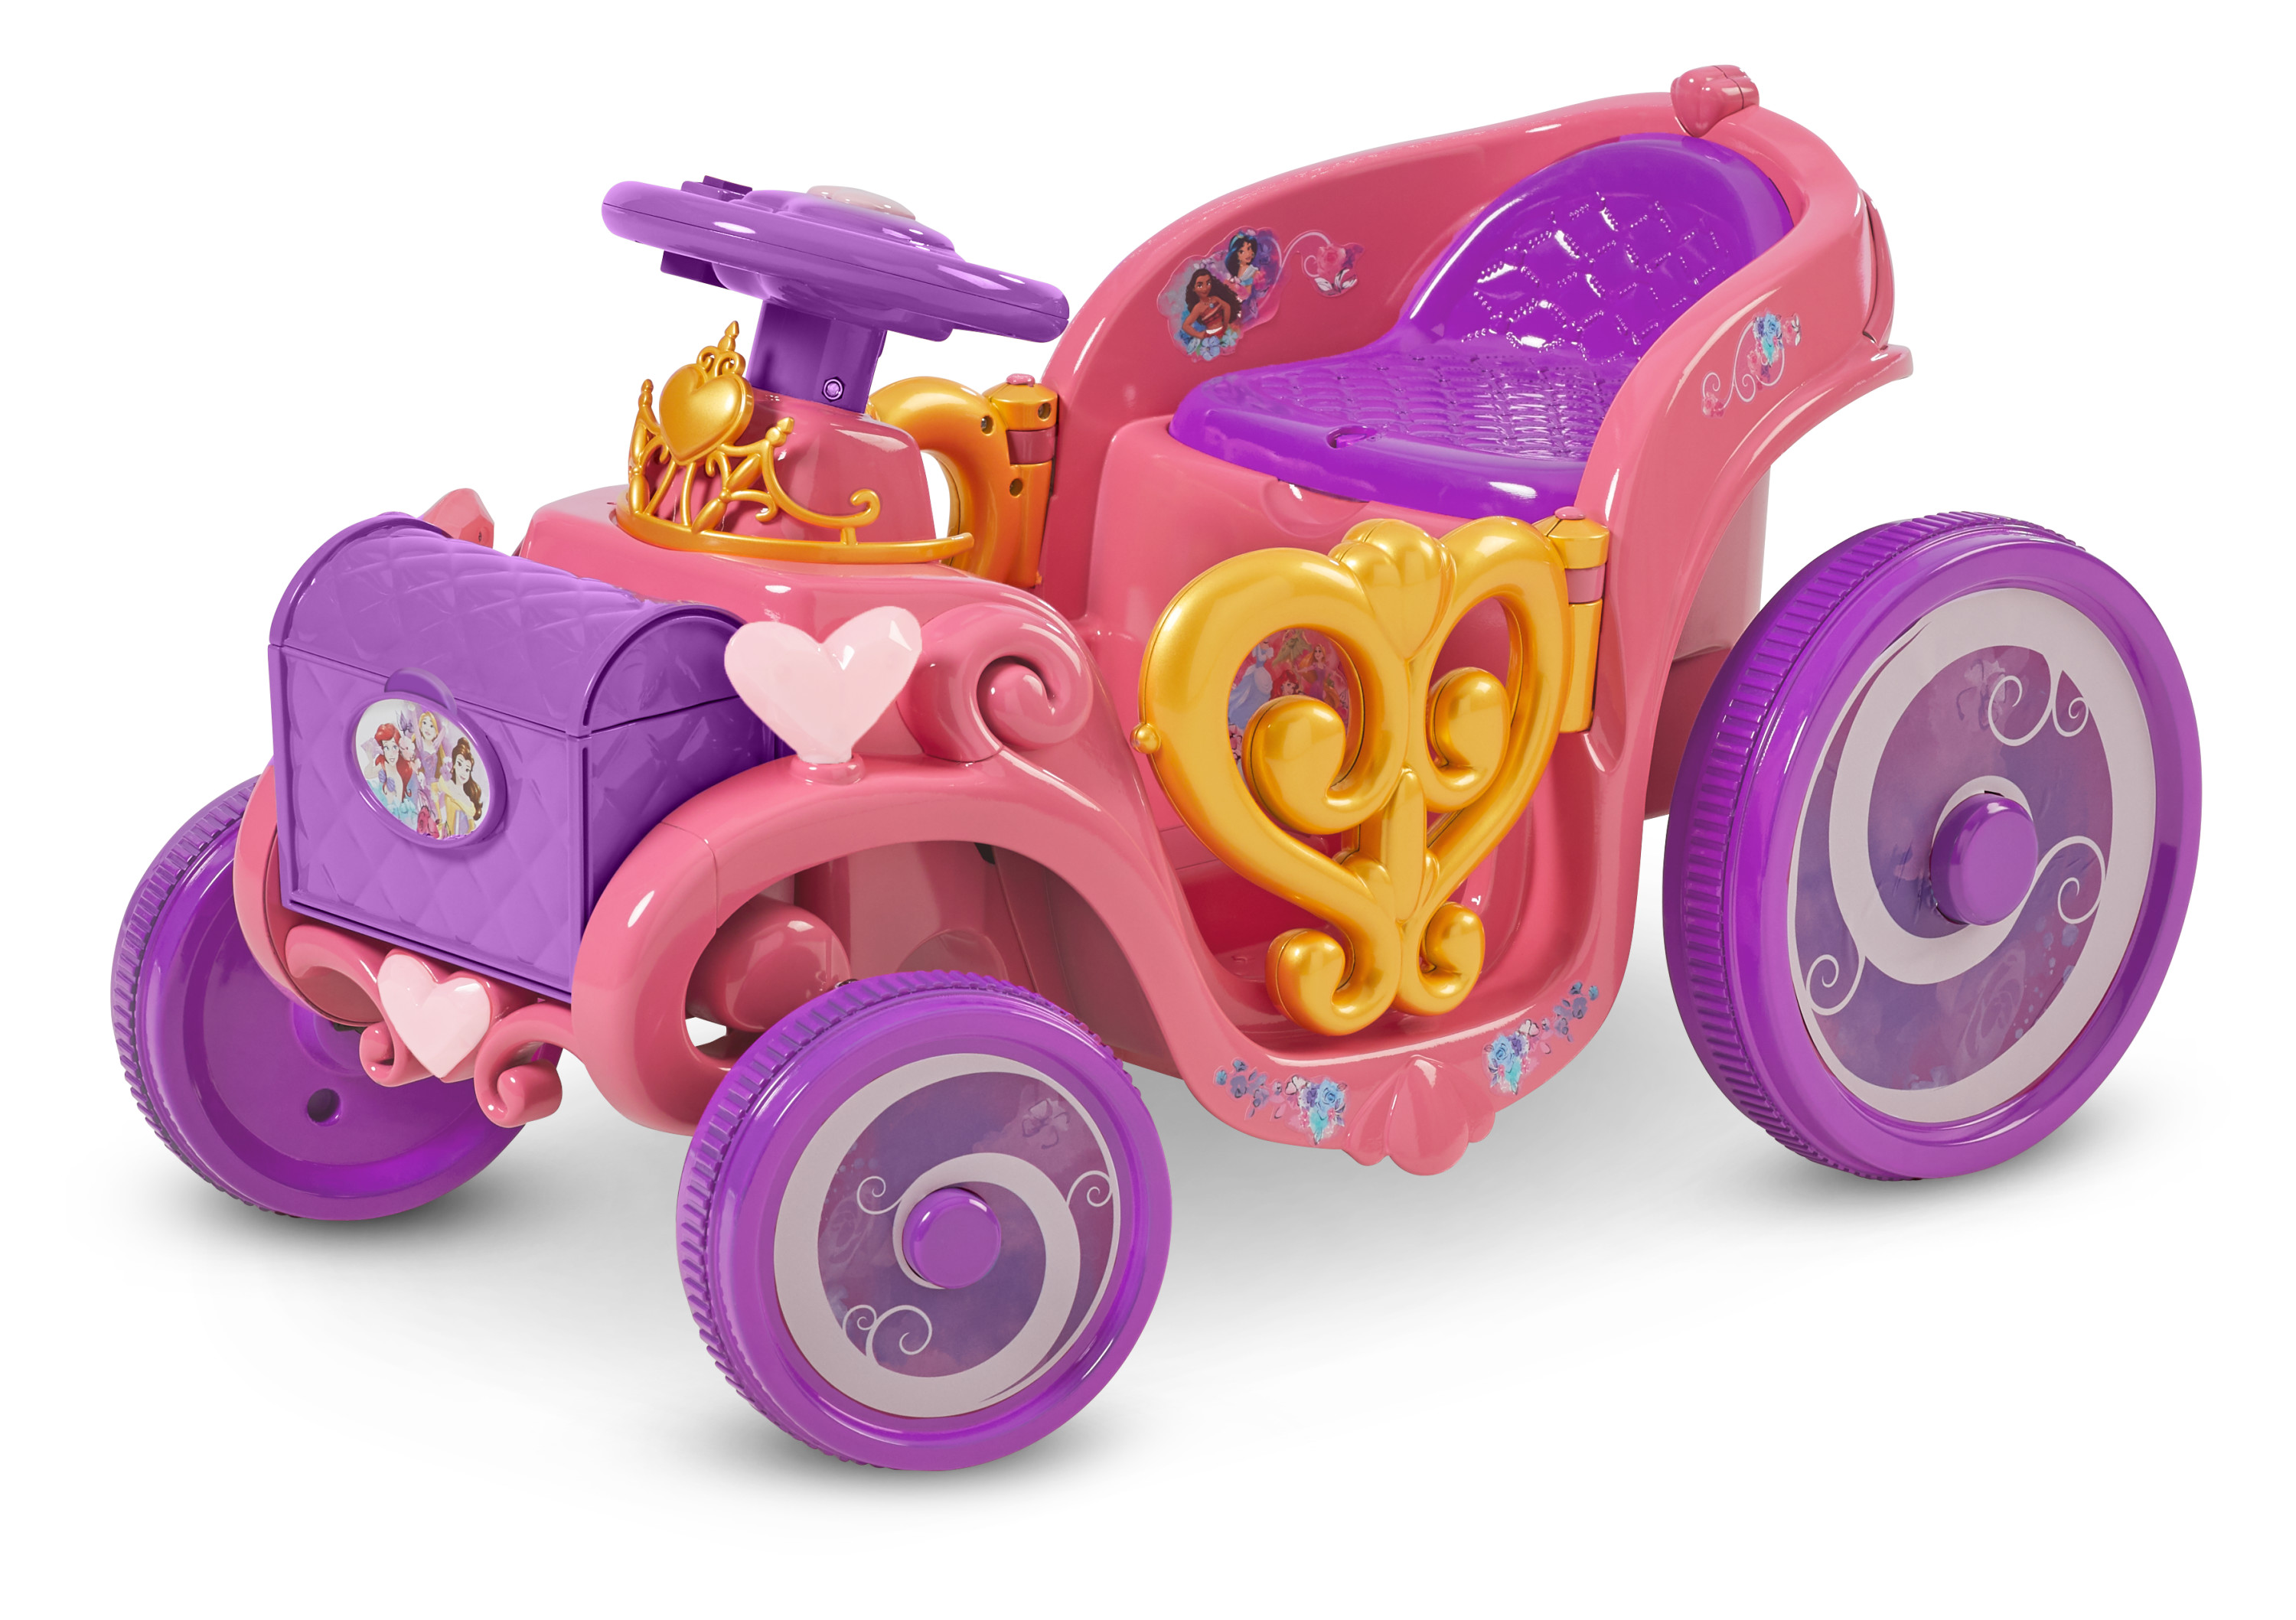 Disney Princess Enchanted Adventure Carriage Quad, 6-Volt Ride-On Toy by Kid Trax, ages 18-30 months, pink - image 8 of 8